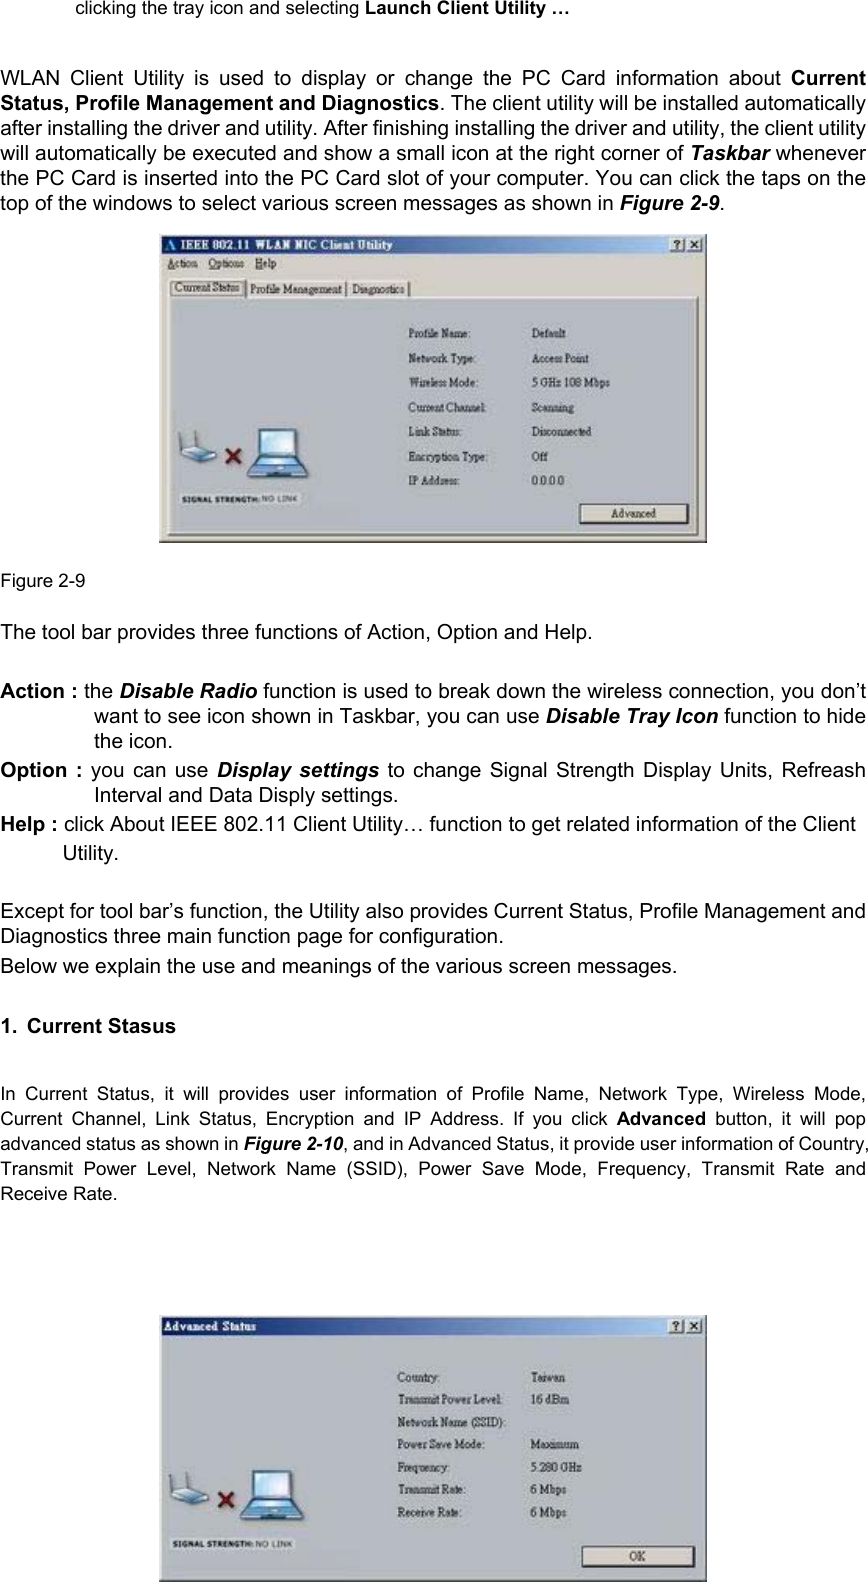         13clicking the tray icon and selecting Launch Client Utility …  WLAN Client Utility is used to display or change the PC Card information about CurrentStatus, Profile Management and Diagnostics. The client utility will be installed automaticallyafter installing the driver and utility. After finishing installing the driver and utility, the client utilitywill automatically be executed and show a small icon at the right corner of Taskbar wheneverthe PC Card is inserted into the PC Card slot of your computer. You can click the taps on thetop of the windows to select various screen messages as shown in Figure 2-9.               Figure 2-9  The tool bar provides three functions of Action, Option and Help.  Action : the Disable Radio function is used to break down the wireless connection, you don’twant to see icon shown in Taskbar, you can use Disable Tray Icon function to hidethe icon. Option : you can use Display settings to change Signal Strength Display Units, RefreashInterval and Data Disply settings. Help : click About IEEE 802.11 Client Utility… function to get related information of the Client Utility.  Except for tool bar’s function, the Utility also provides Current Status, Profile Management andDiagnostics three main function page for configuration. Below we explain the use and meanings of the various screen messages. 1. Current Stasus  In Current Status, it will provides user information of Profile Name, Network Type, Wireless Mode,Current Channel, Link Status, Encryption and IP Address. If you click Advanced  button, it will popadvanced status as shown in Figure 2-10, and in Advanced Status, it provide user information of Country,Transmit Power Level, Network Name (SSID), Power Save Mode, Frequency, Transmit Rate andReceive Rate.      